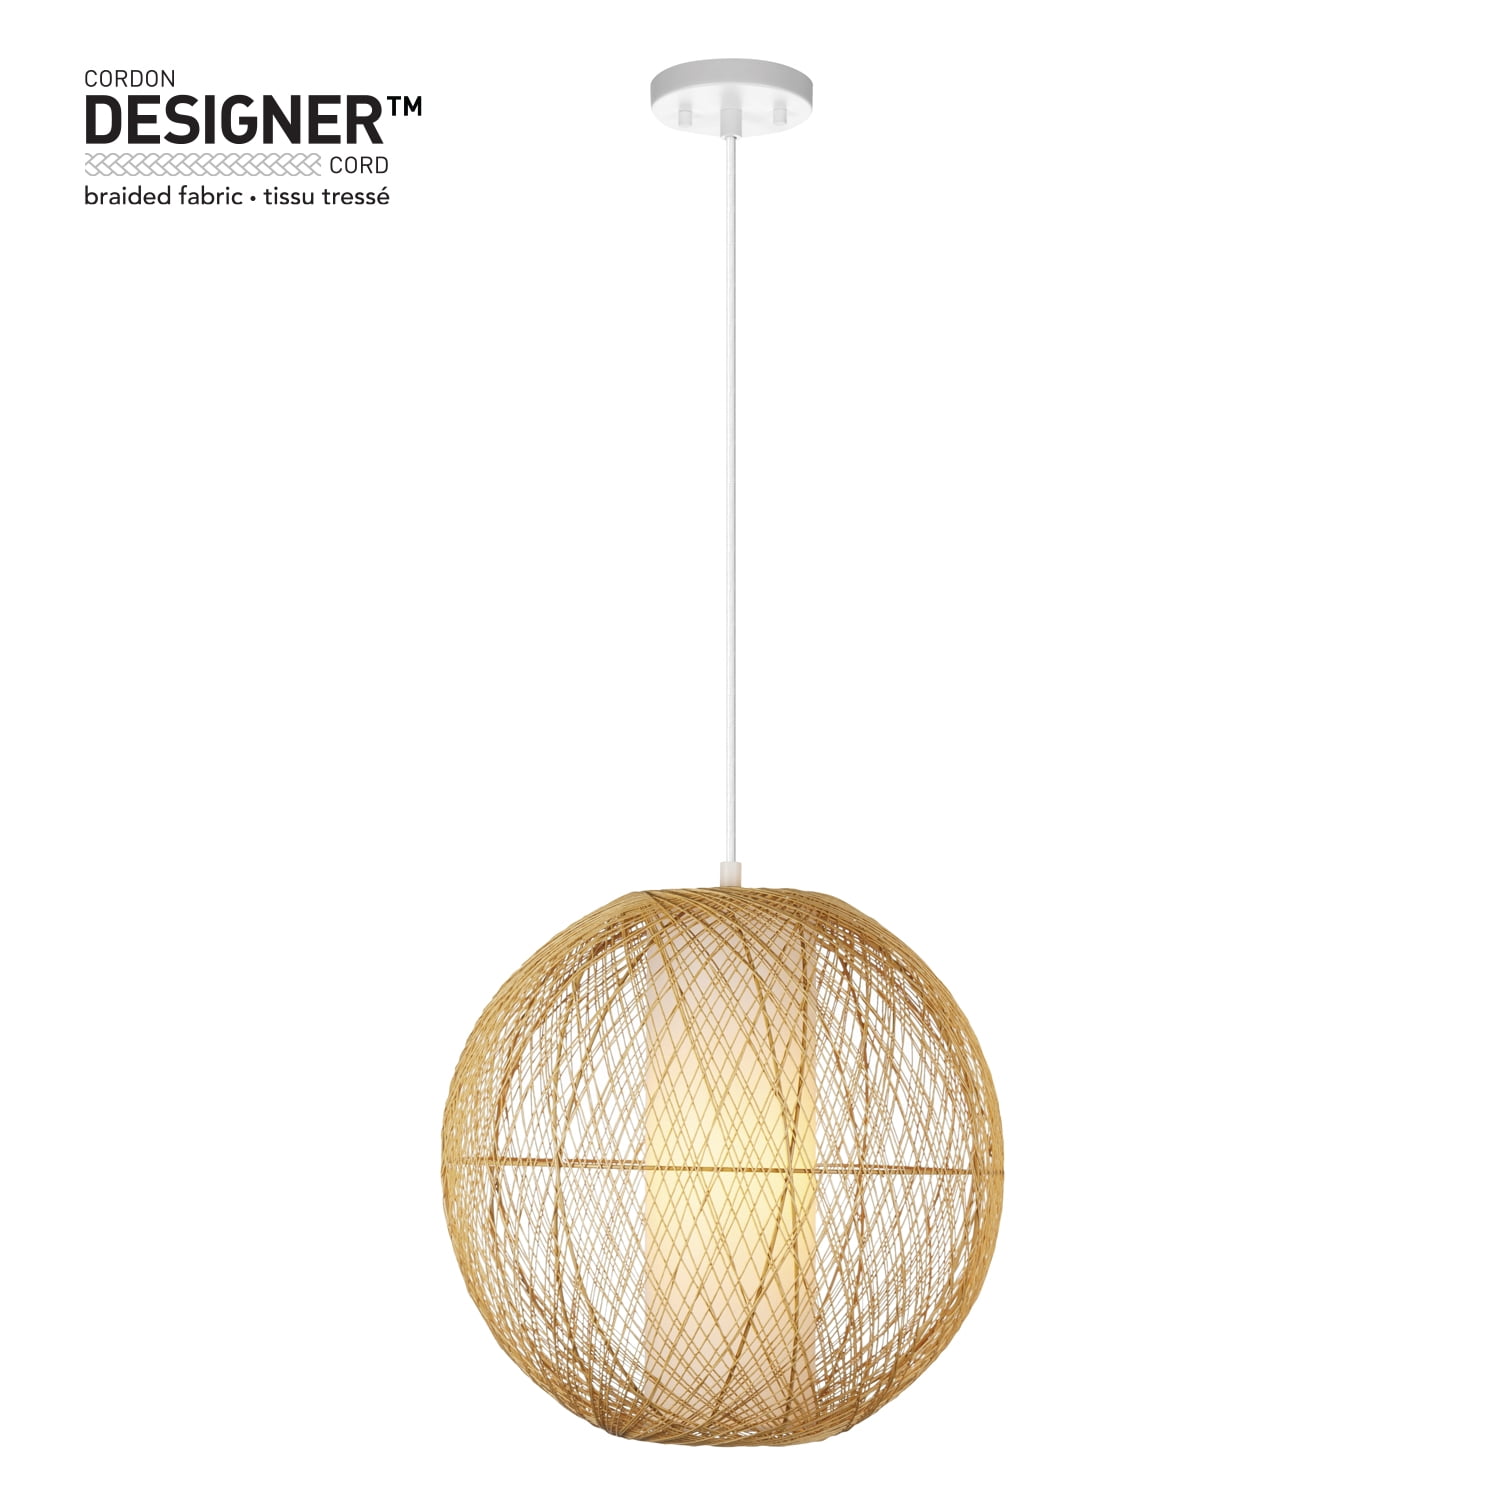 1x Pendant Hanging Lights Ball Lamp Shade Ceiling Lamp Cover for Bedroom Bar